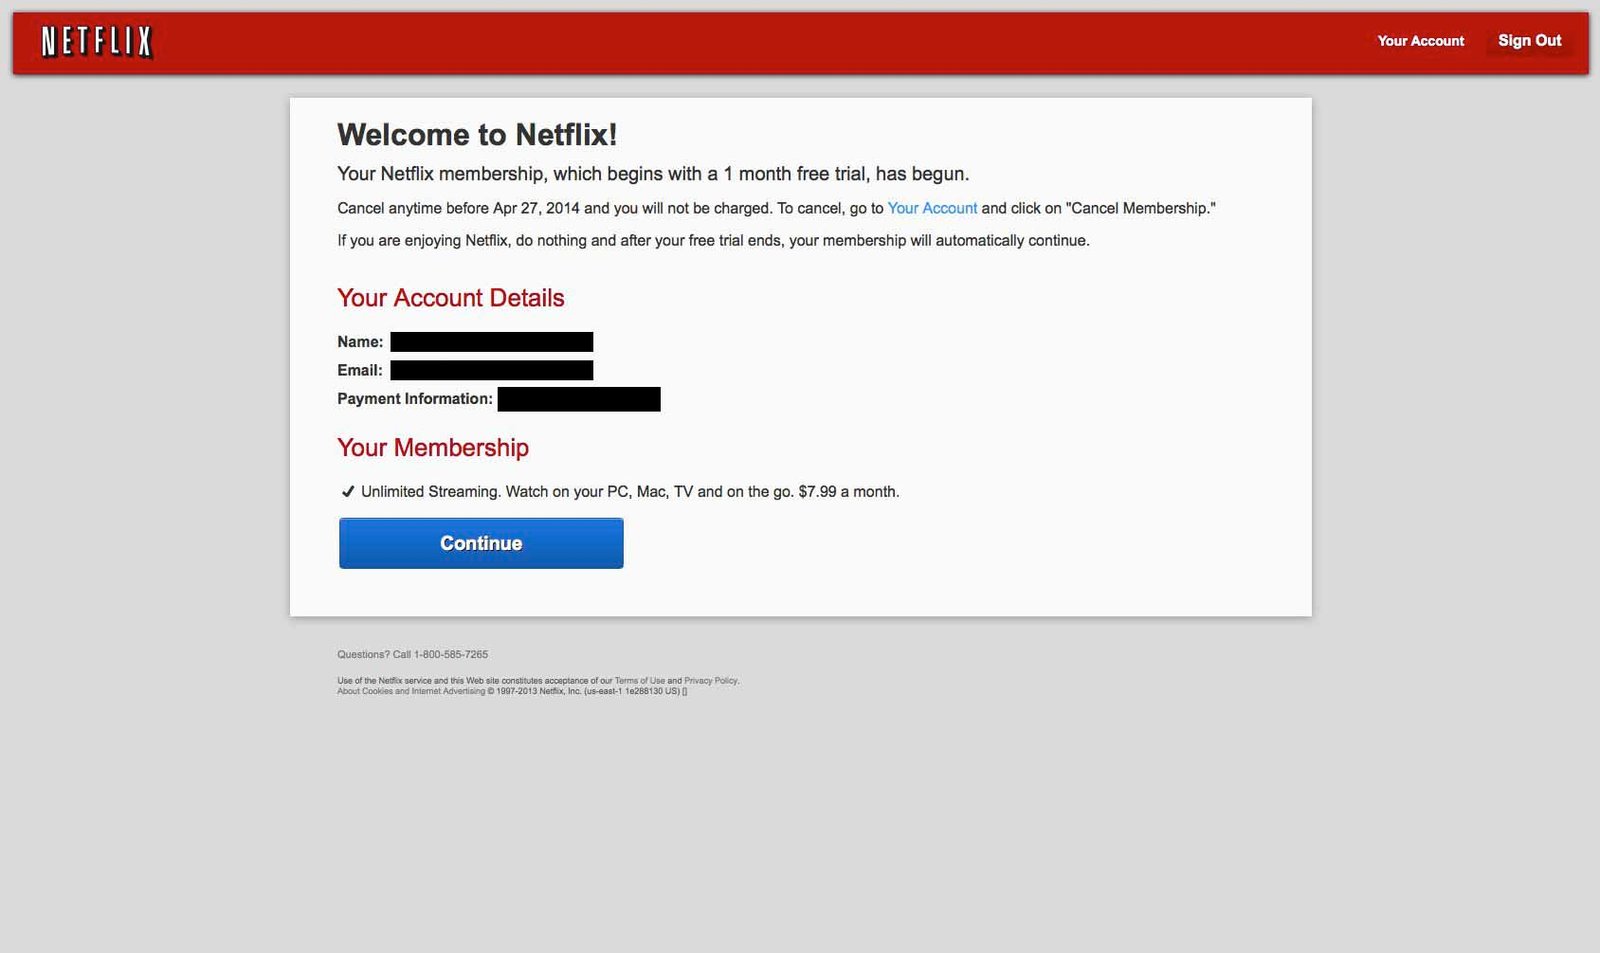 Bypass Netflix - movies & tV shows free account